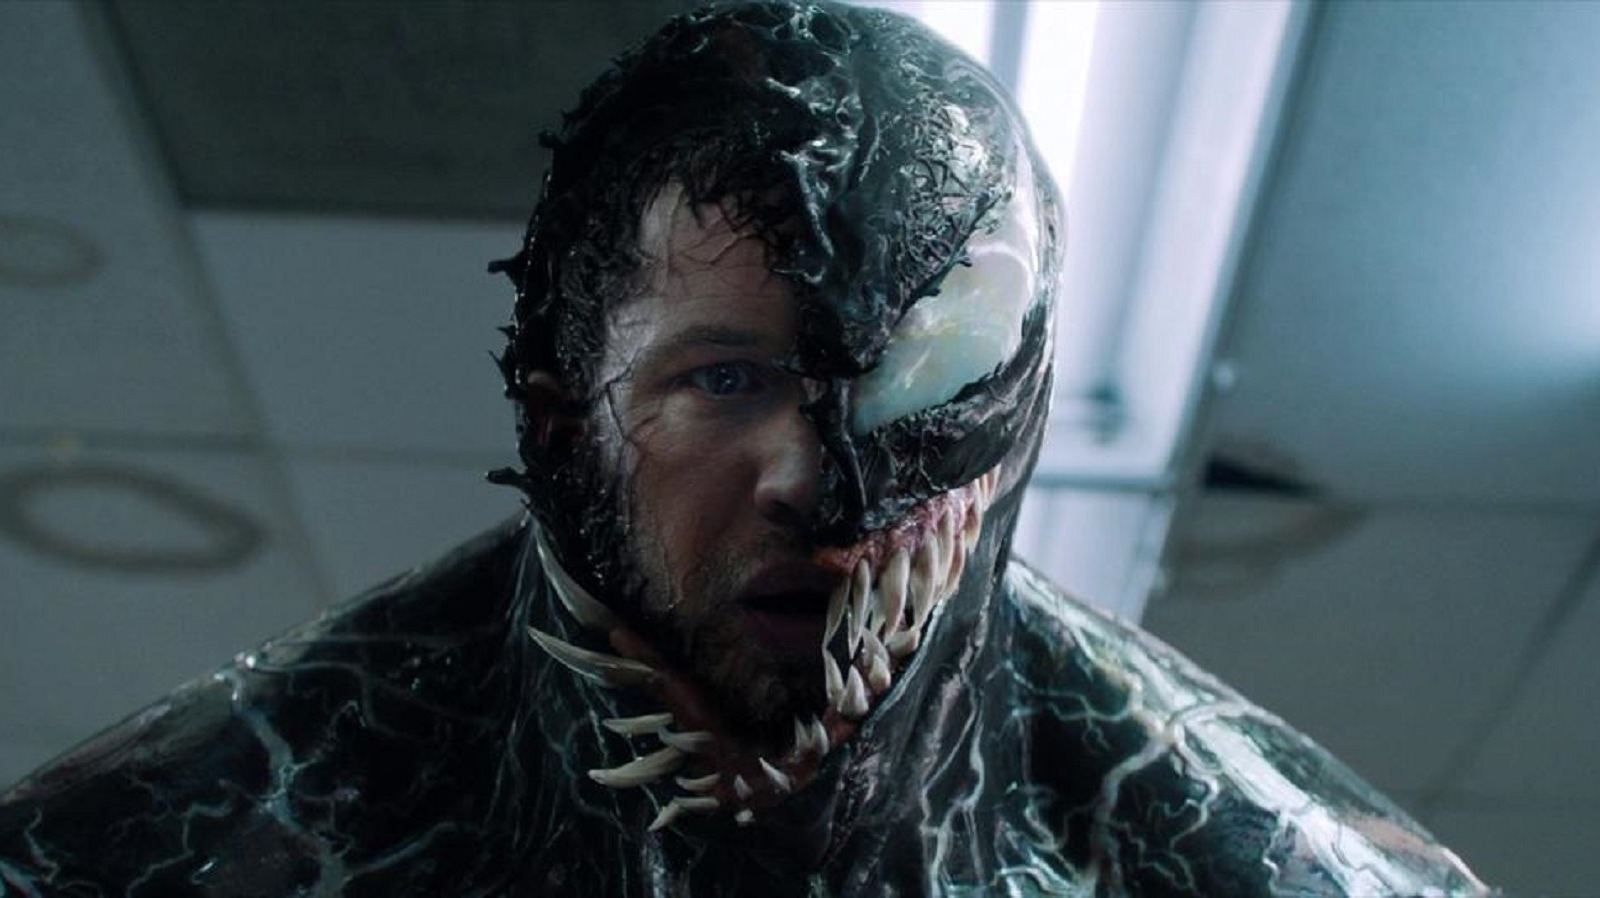 Venom 3'S Release Date Officially Get A Huge Bump Up!